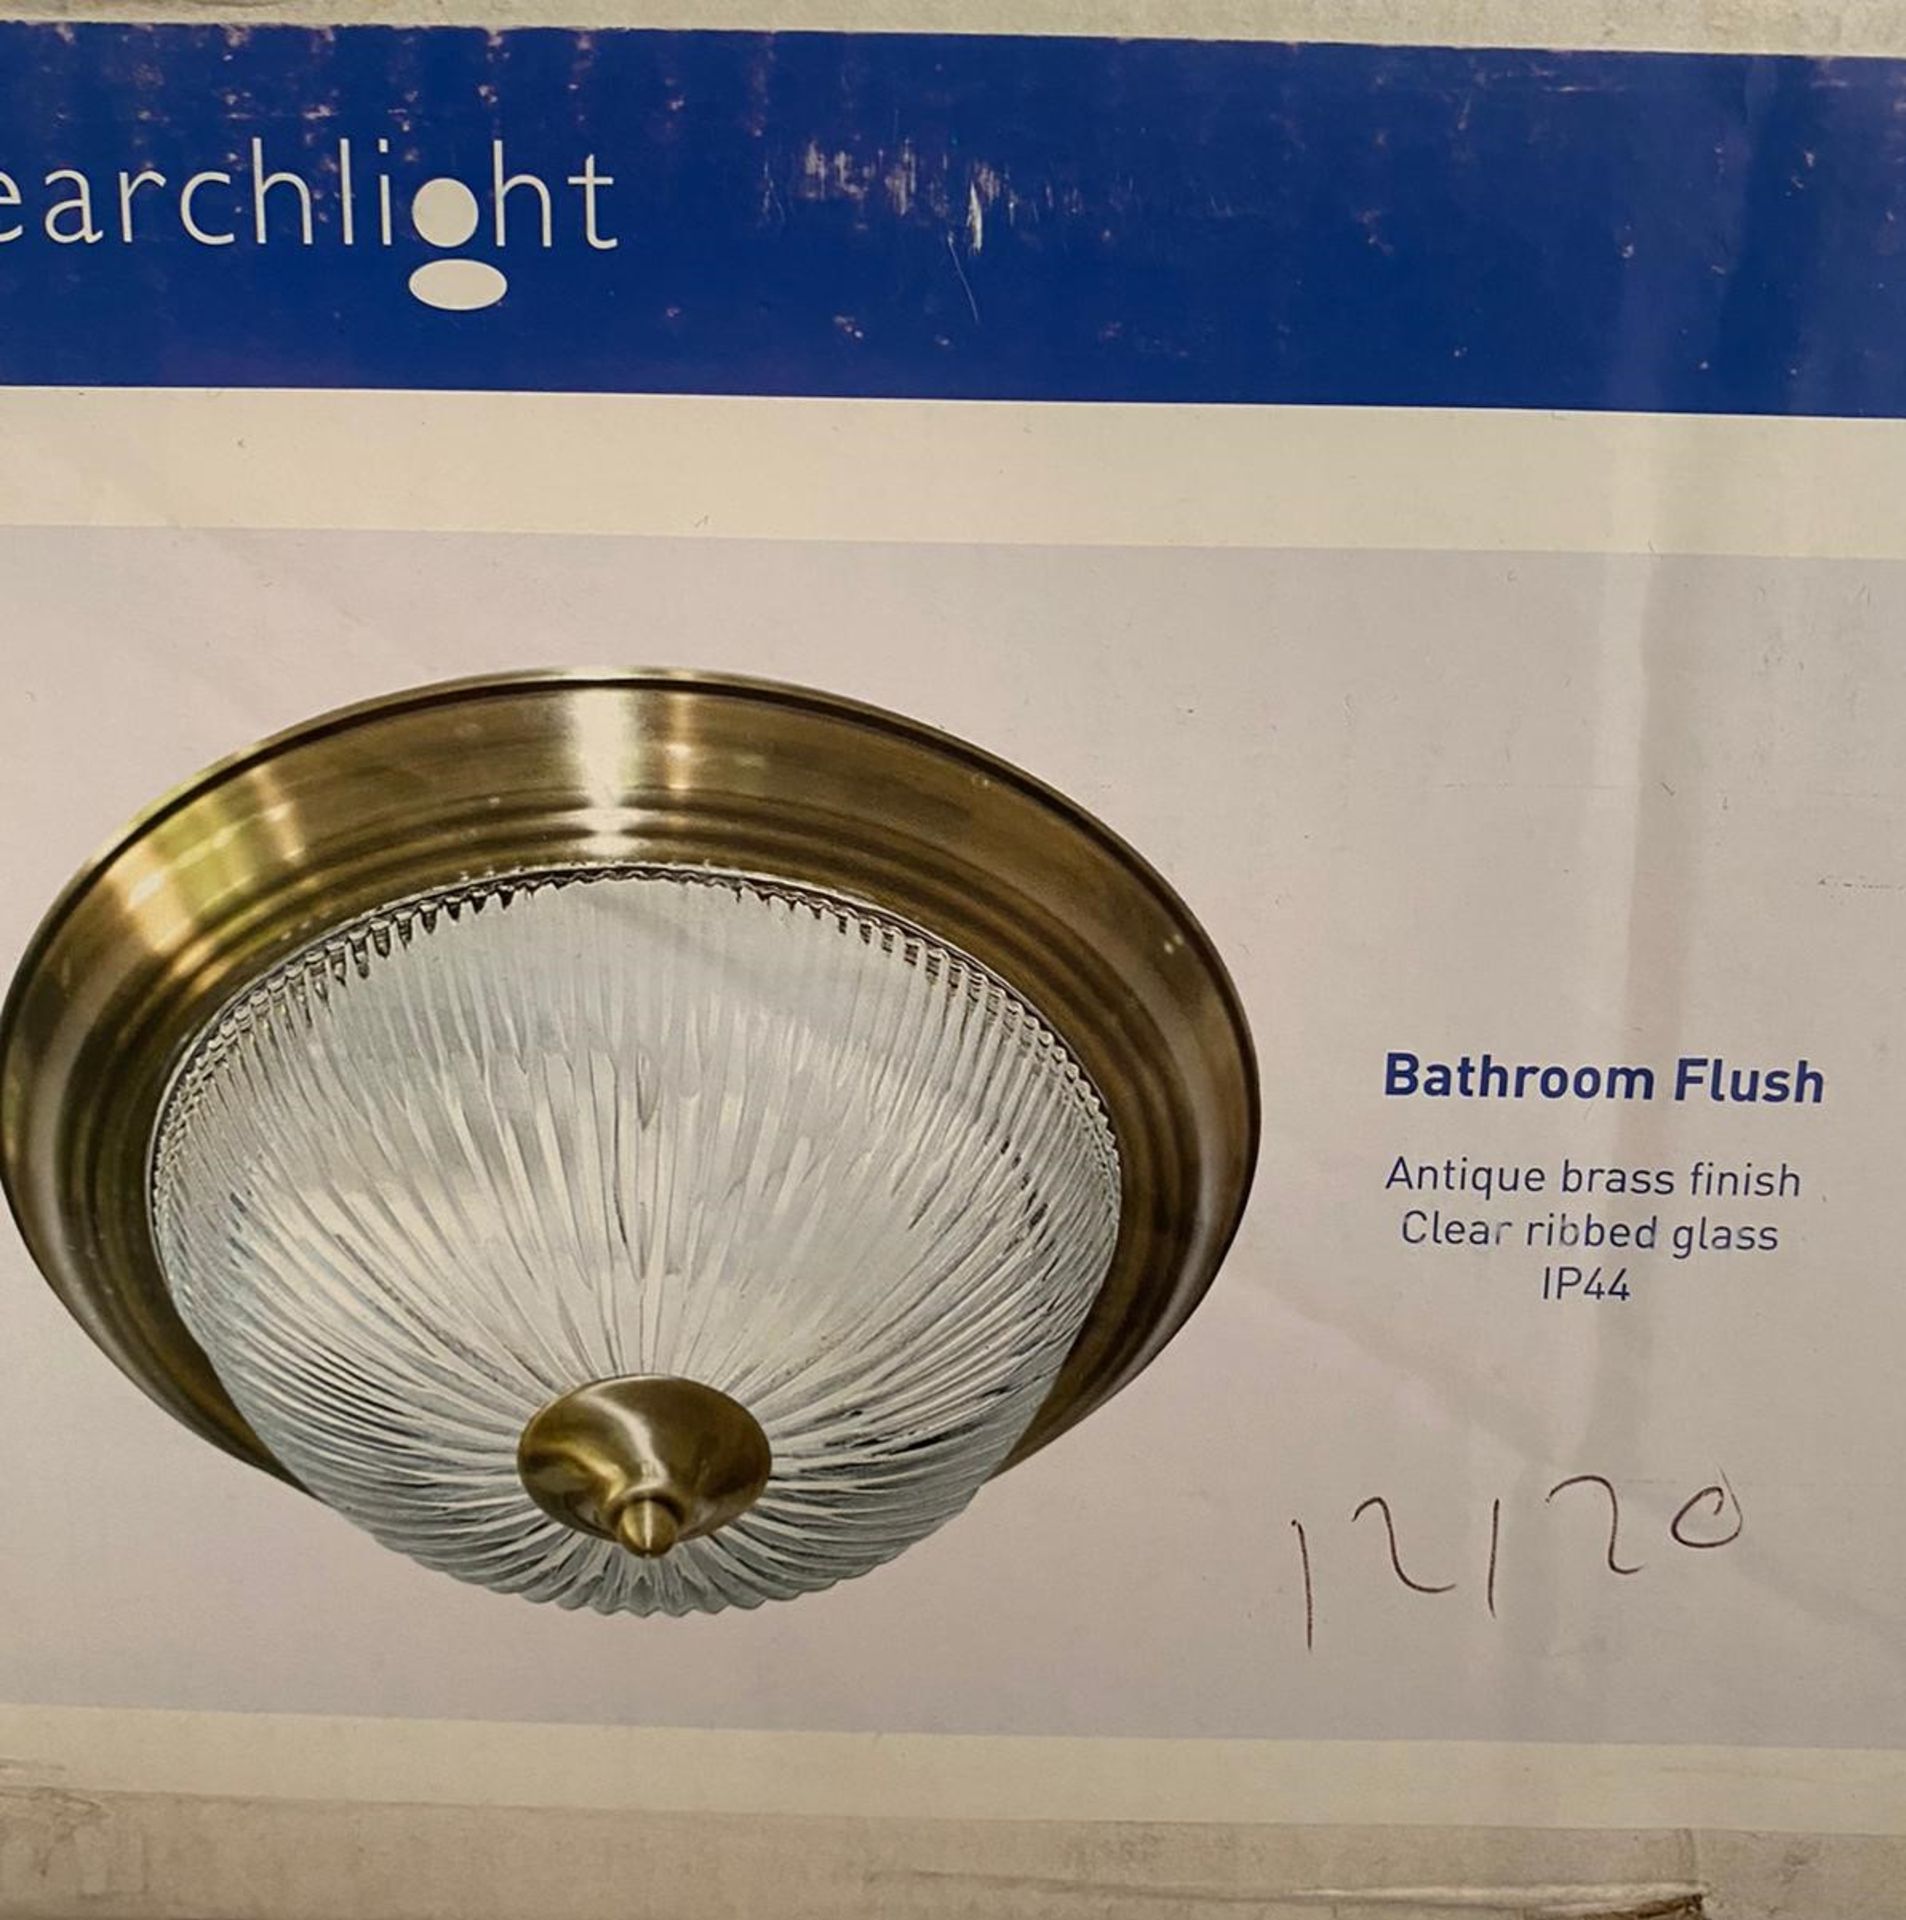 1 x Searchlight Bathroom Flush in Antique Brass - Ref: 4370 - New and Boxed stock - RR: £50 - Image 2 of 4